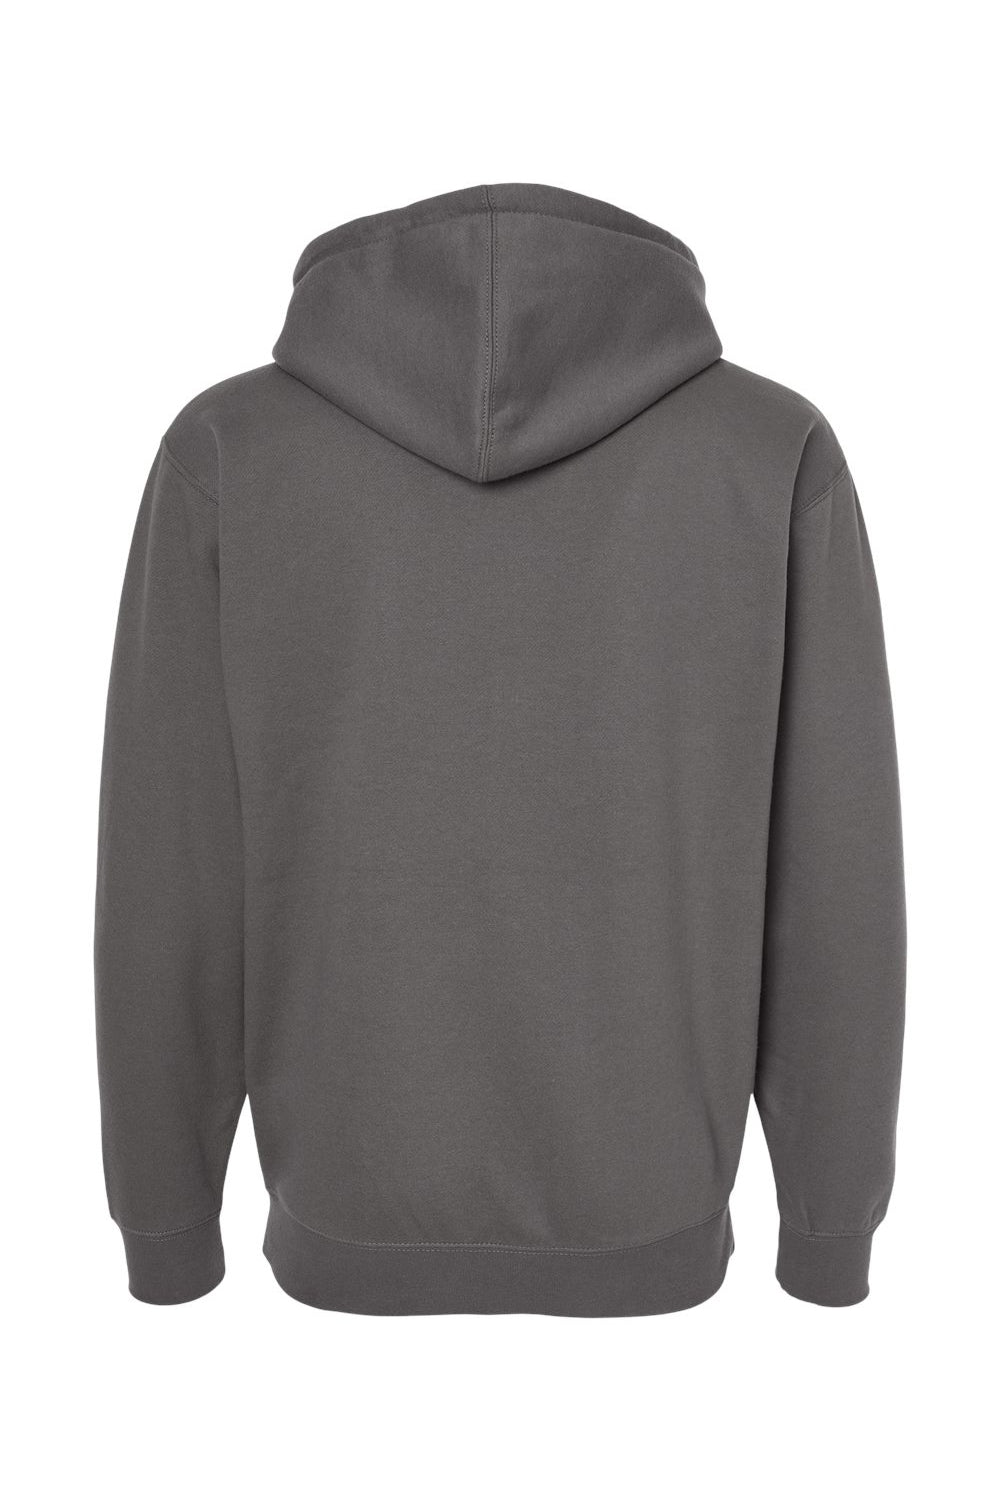 Independent Trading Co. IND4000Z Mens Full Zip Hooded Sweatshirt Hoodie Charcoal Grey Flat Back